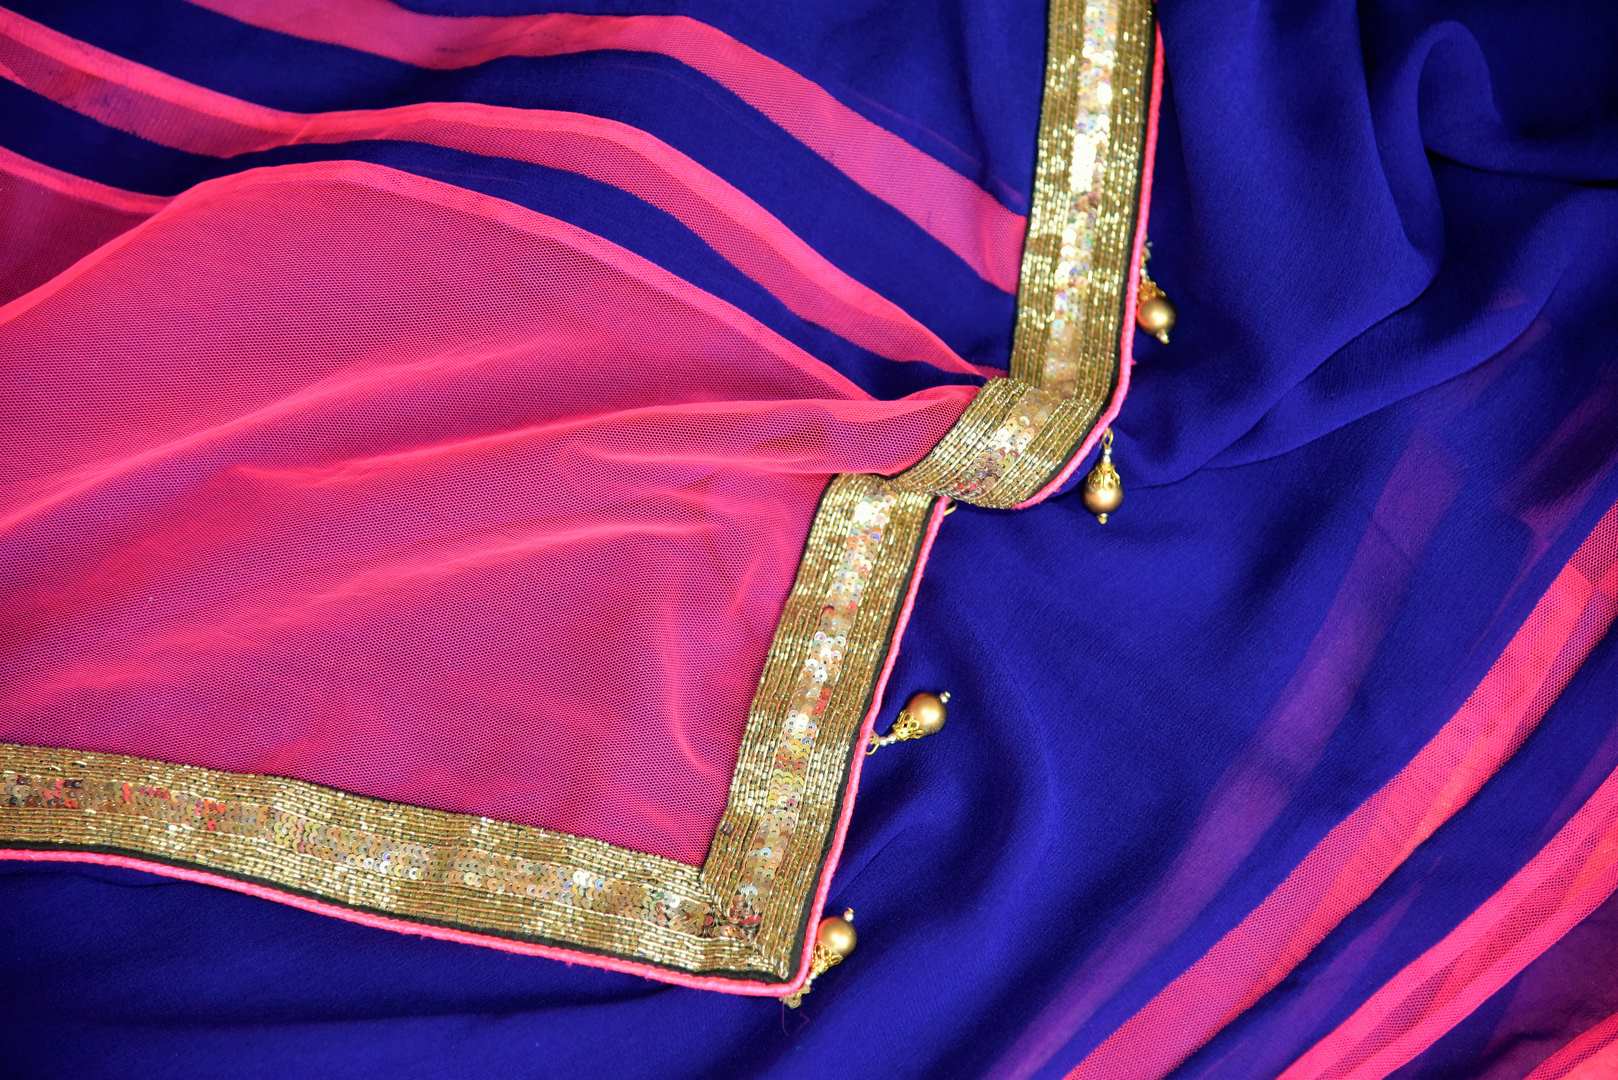 Buy dark blue georgette saree online in USA with pink embroidered net border from Pure Elegance. Let your ethnic style be one of a kind with an exquisite variety of Indian handloom sarees, pure silk sarees, designer sarees from our exclusive fashion store in USA.-details